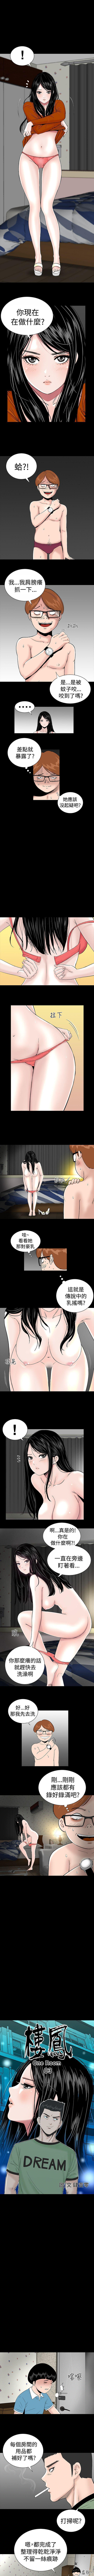 Chile 樓鳳 1-48 Adorable - Page 11